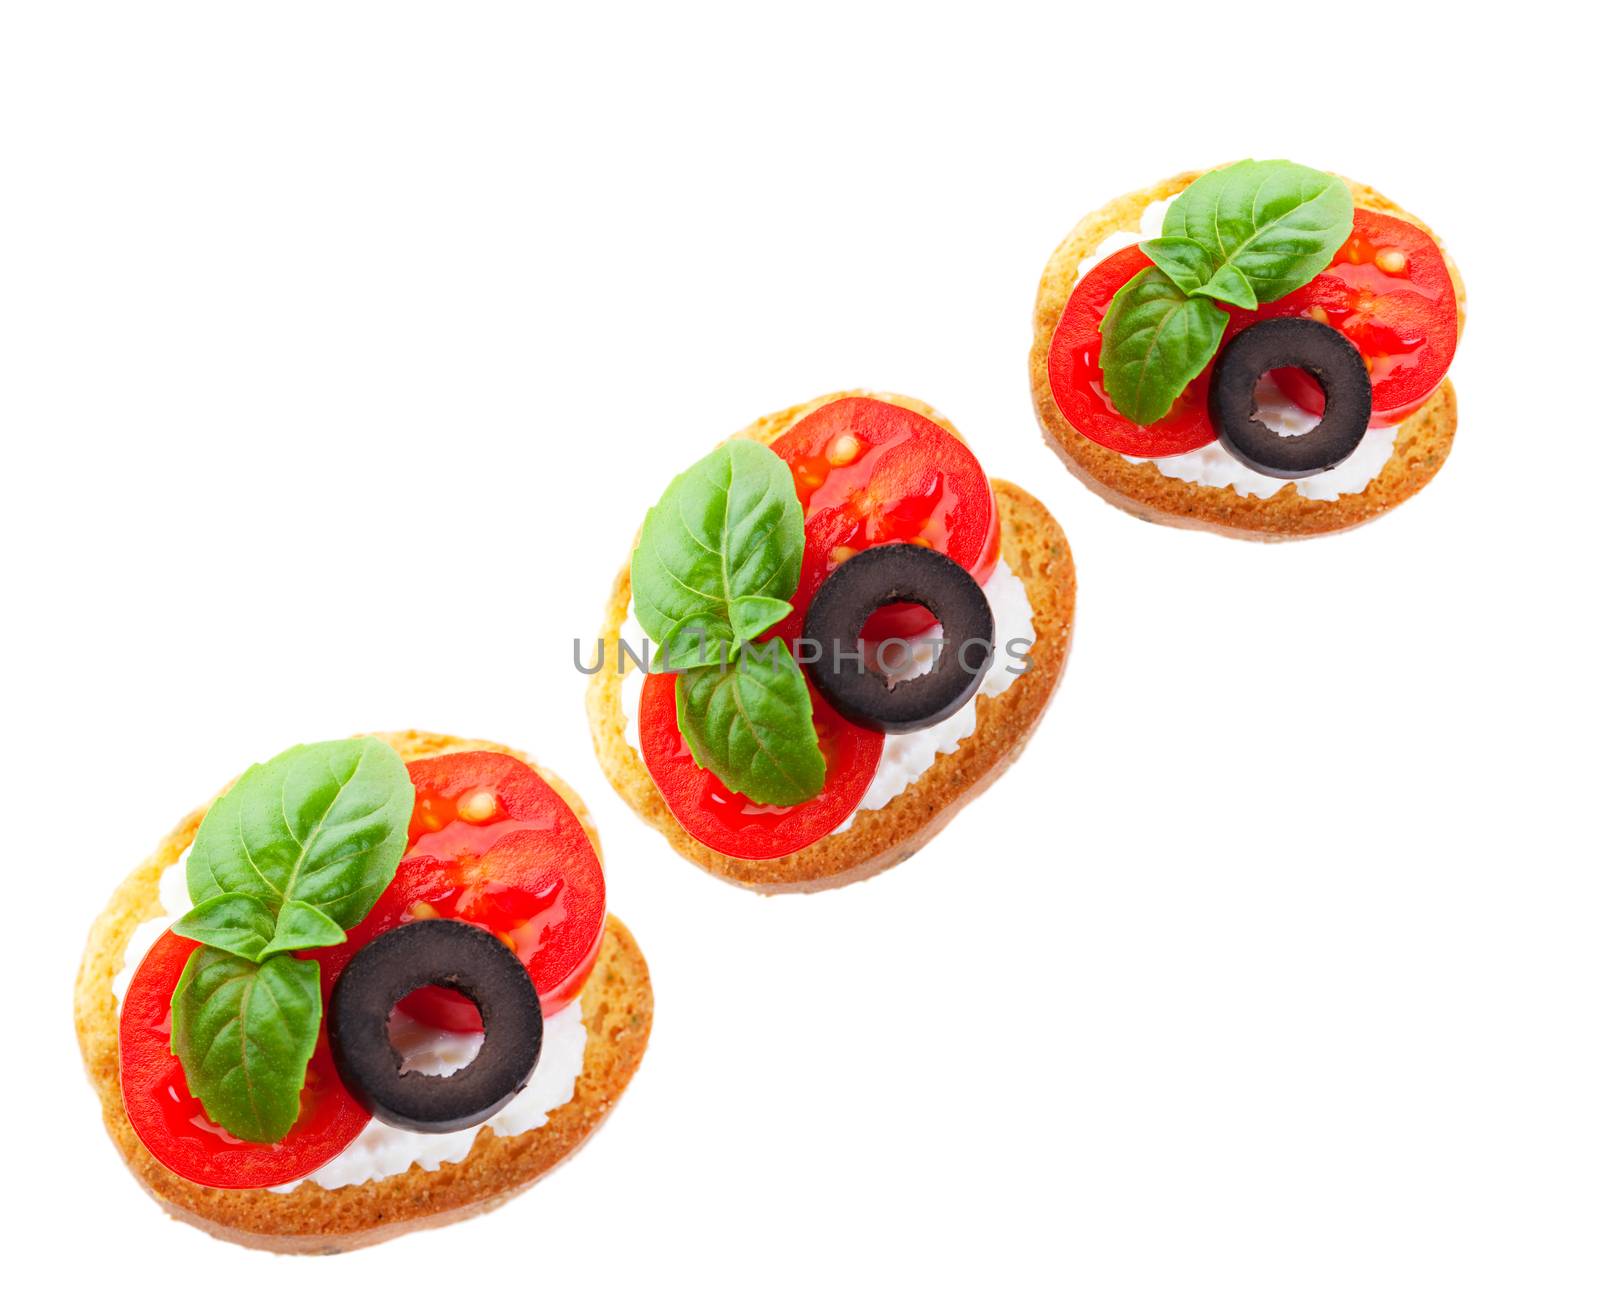 Juicy slices of baby tomato on a goat cheese covered baguette cracker, garnished with a slice of black olive and a fresh sprig of basil.  Shot on white background.